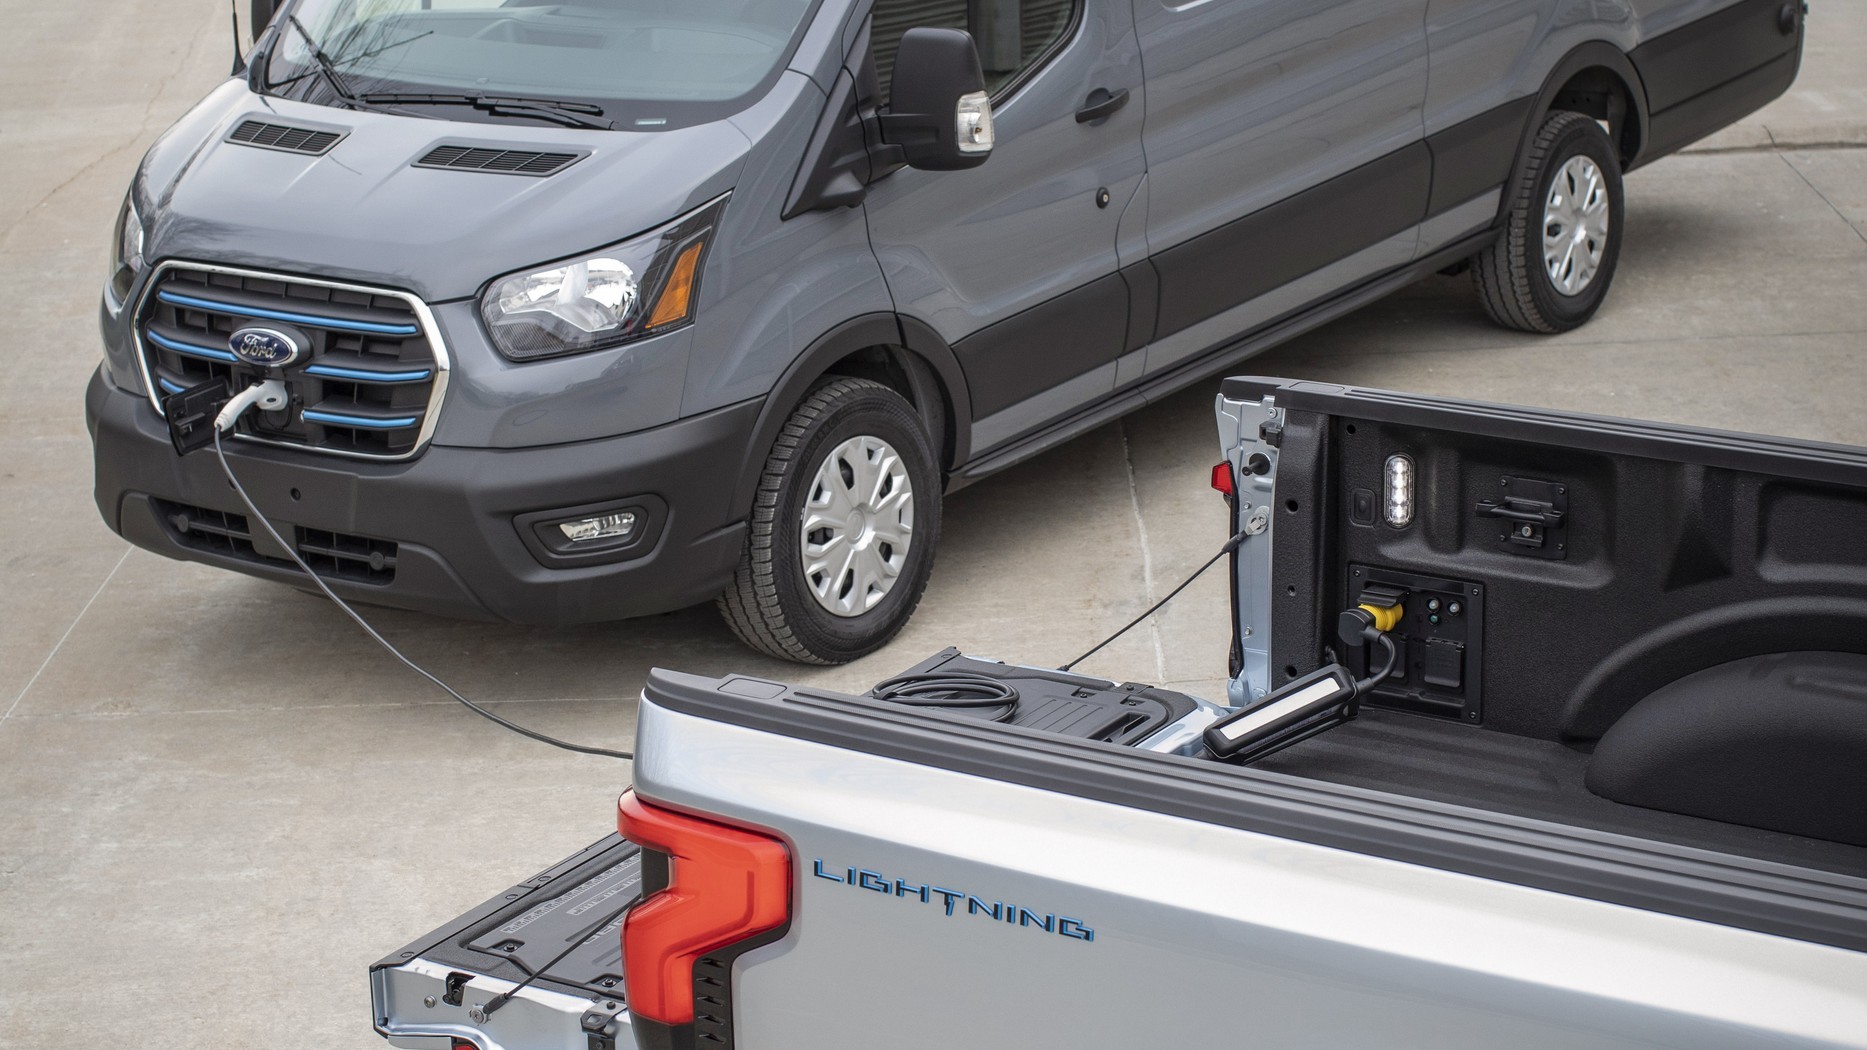 Ford F150's Pro Power Onboard Will Power EVs In Need of Charge